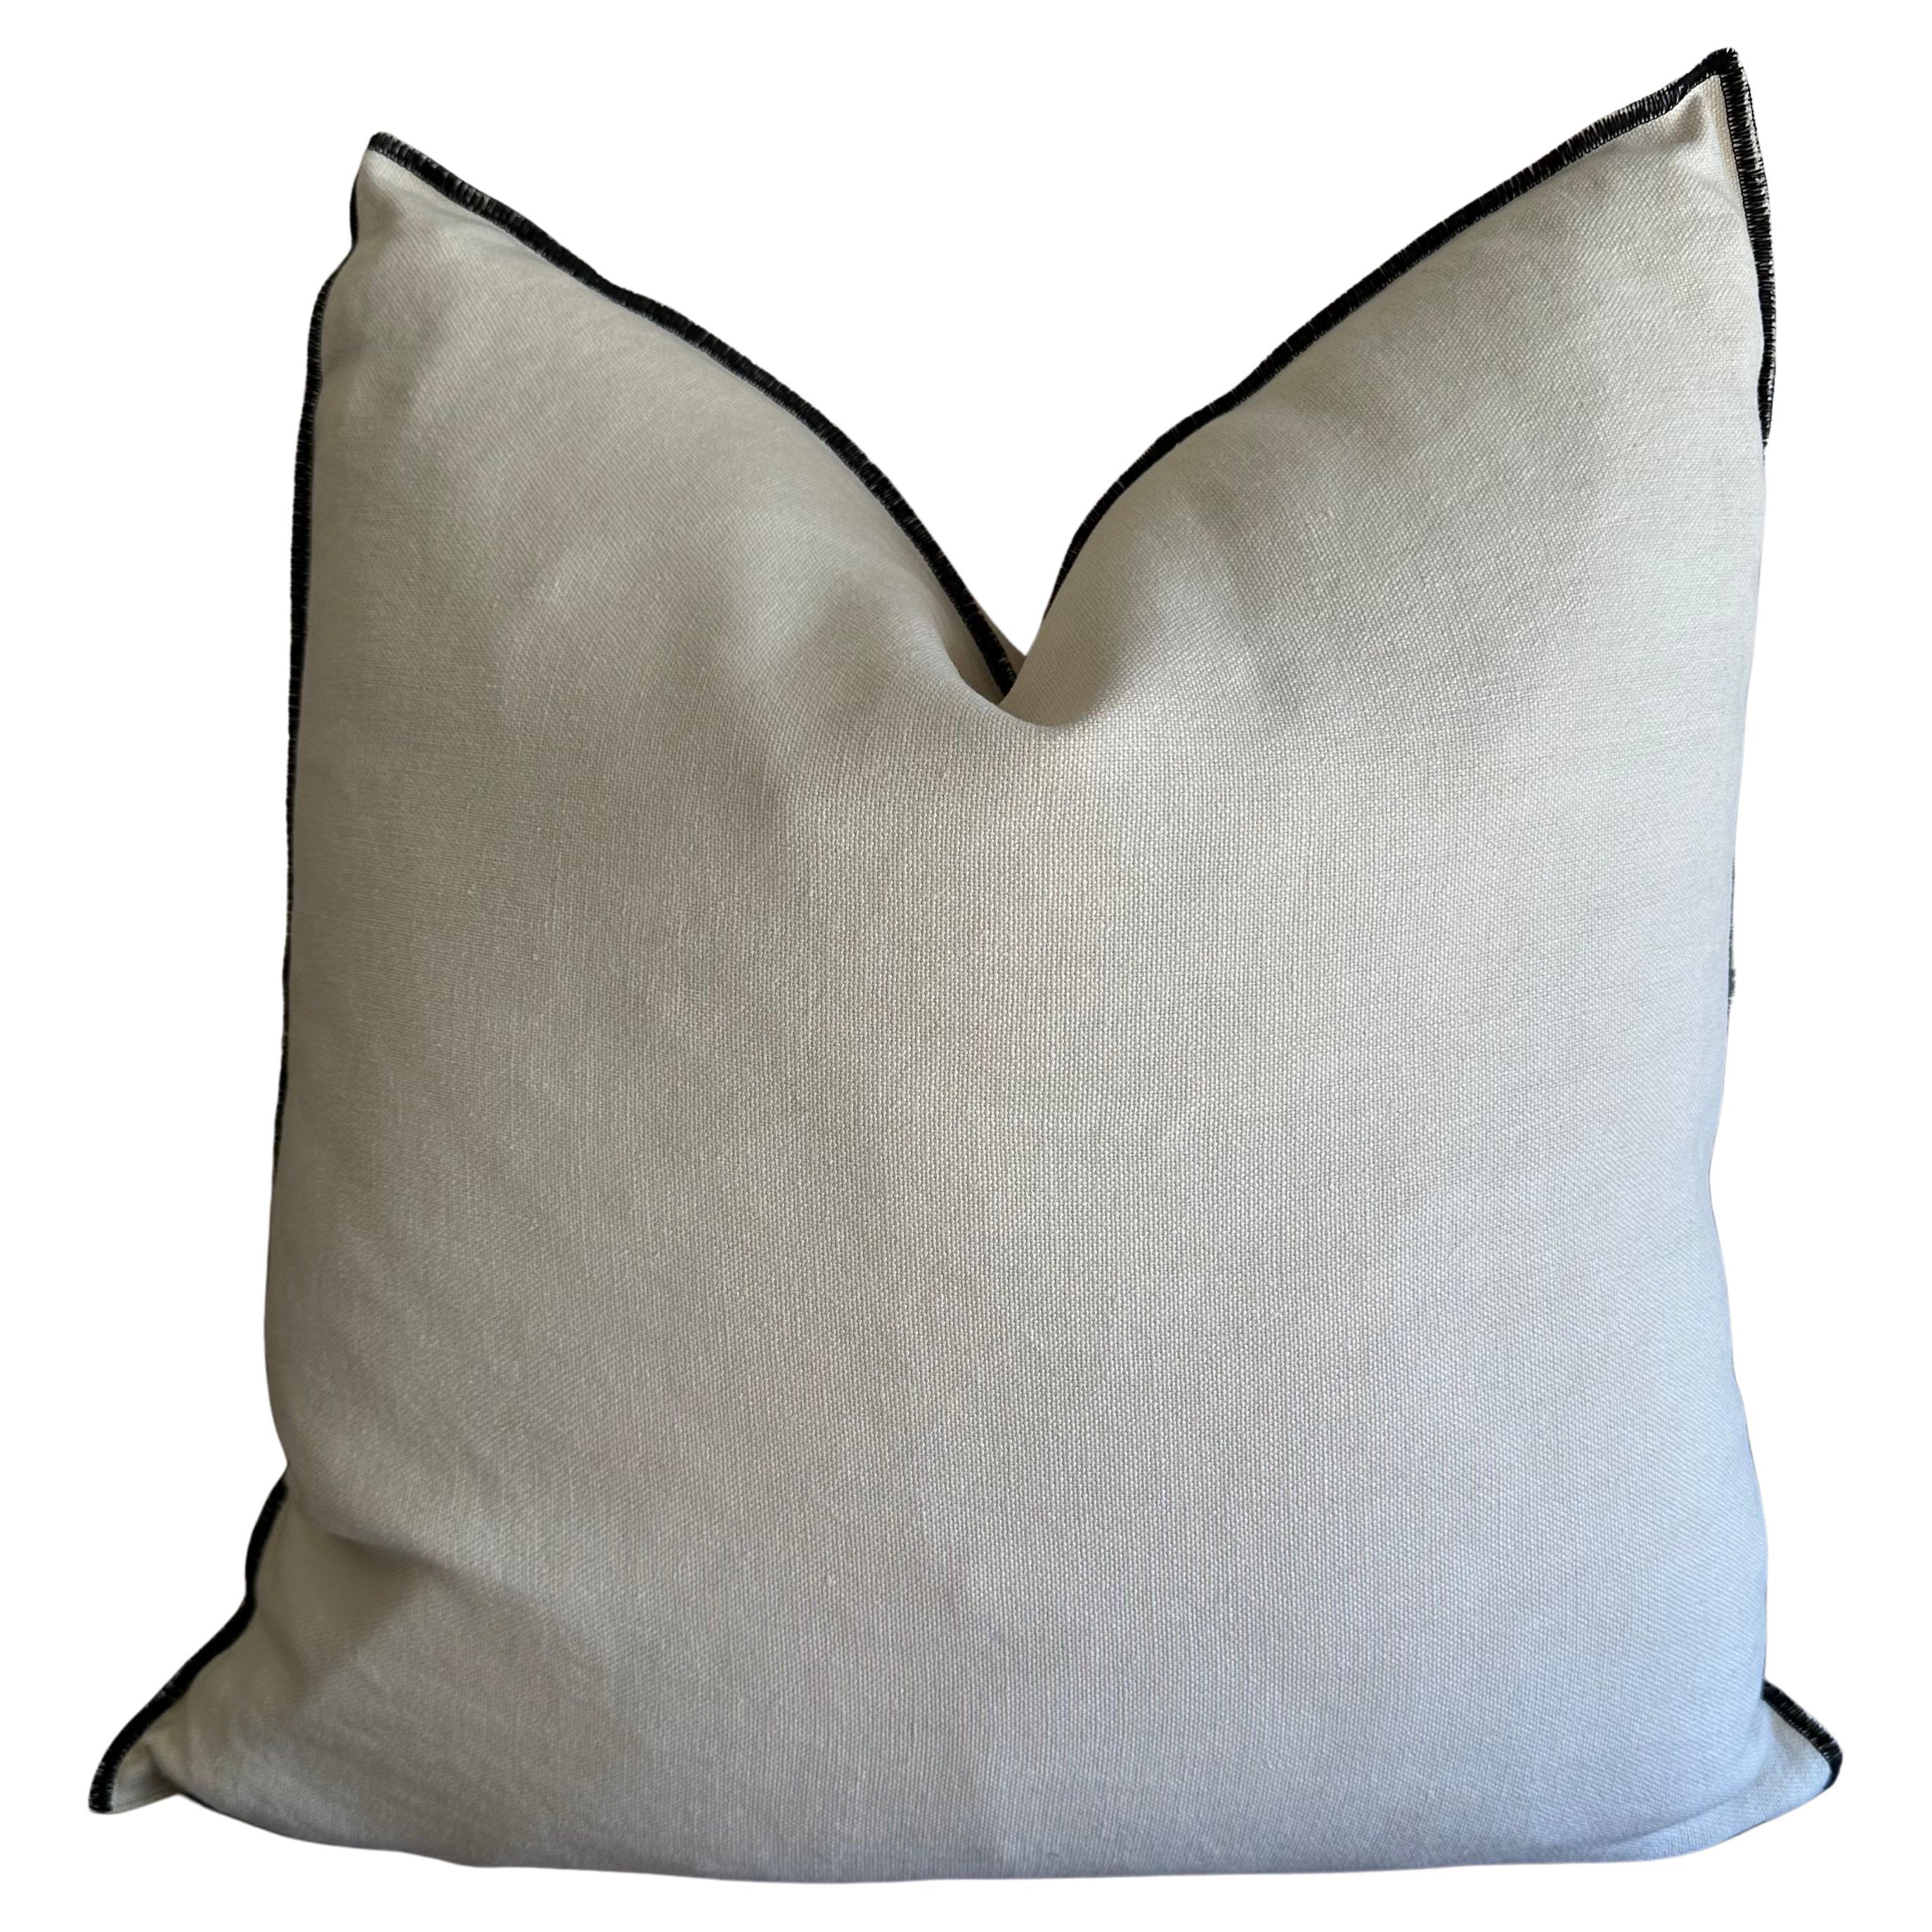 French Stone Washed Linen Accent Pillow with Down Feather Insert